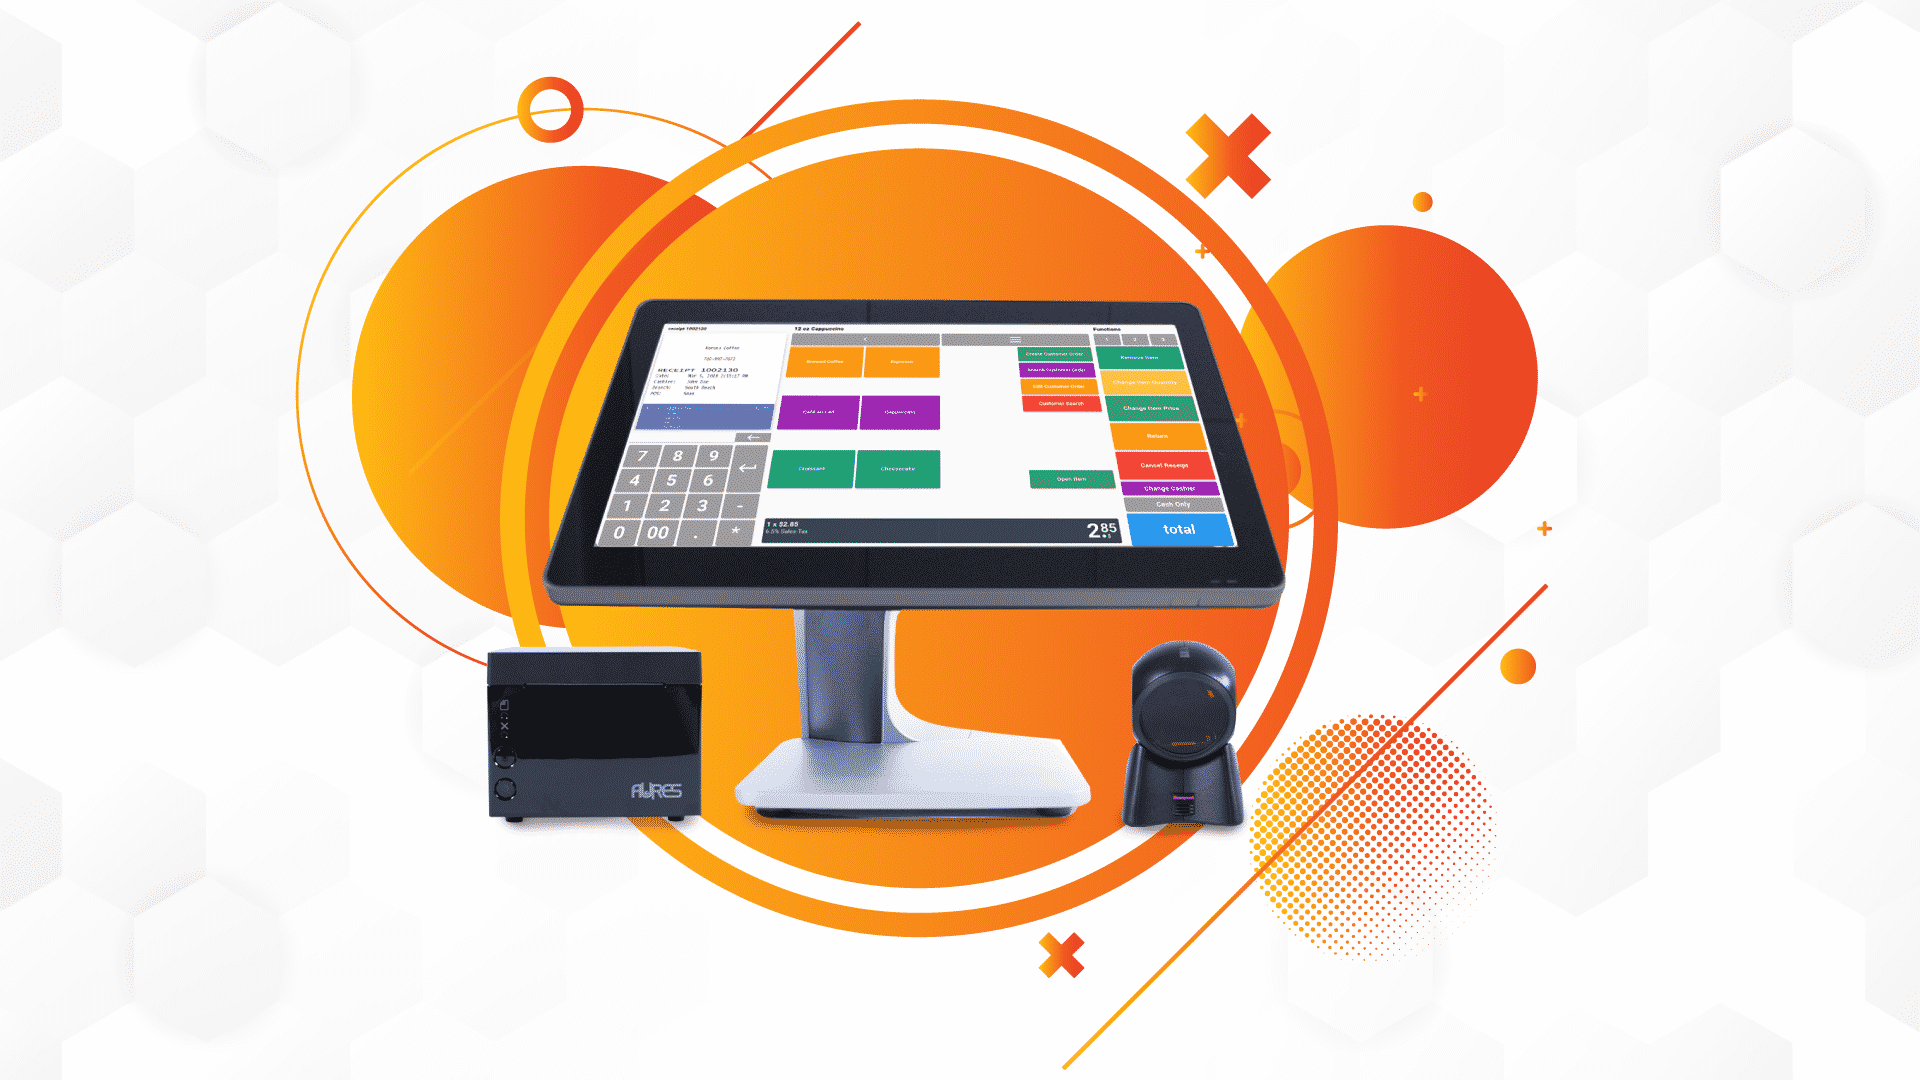 quick service desktop POS with scanner and receipt printer